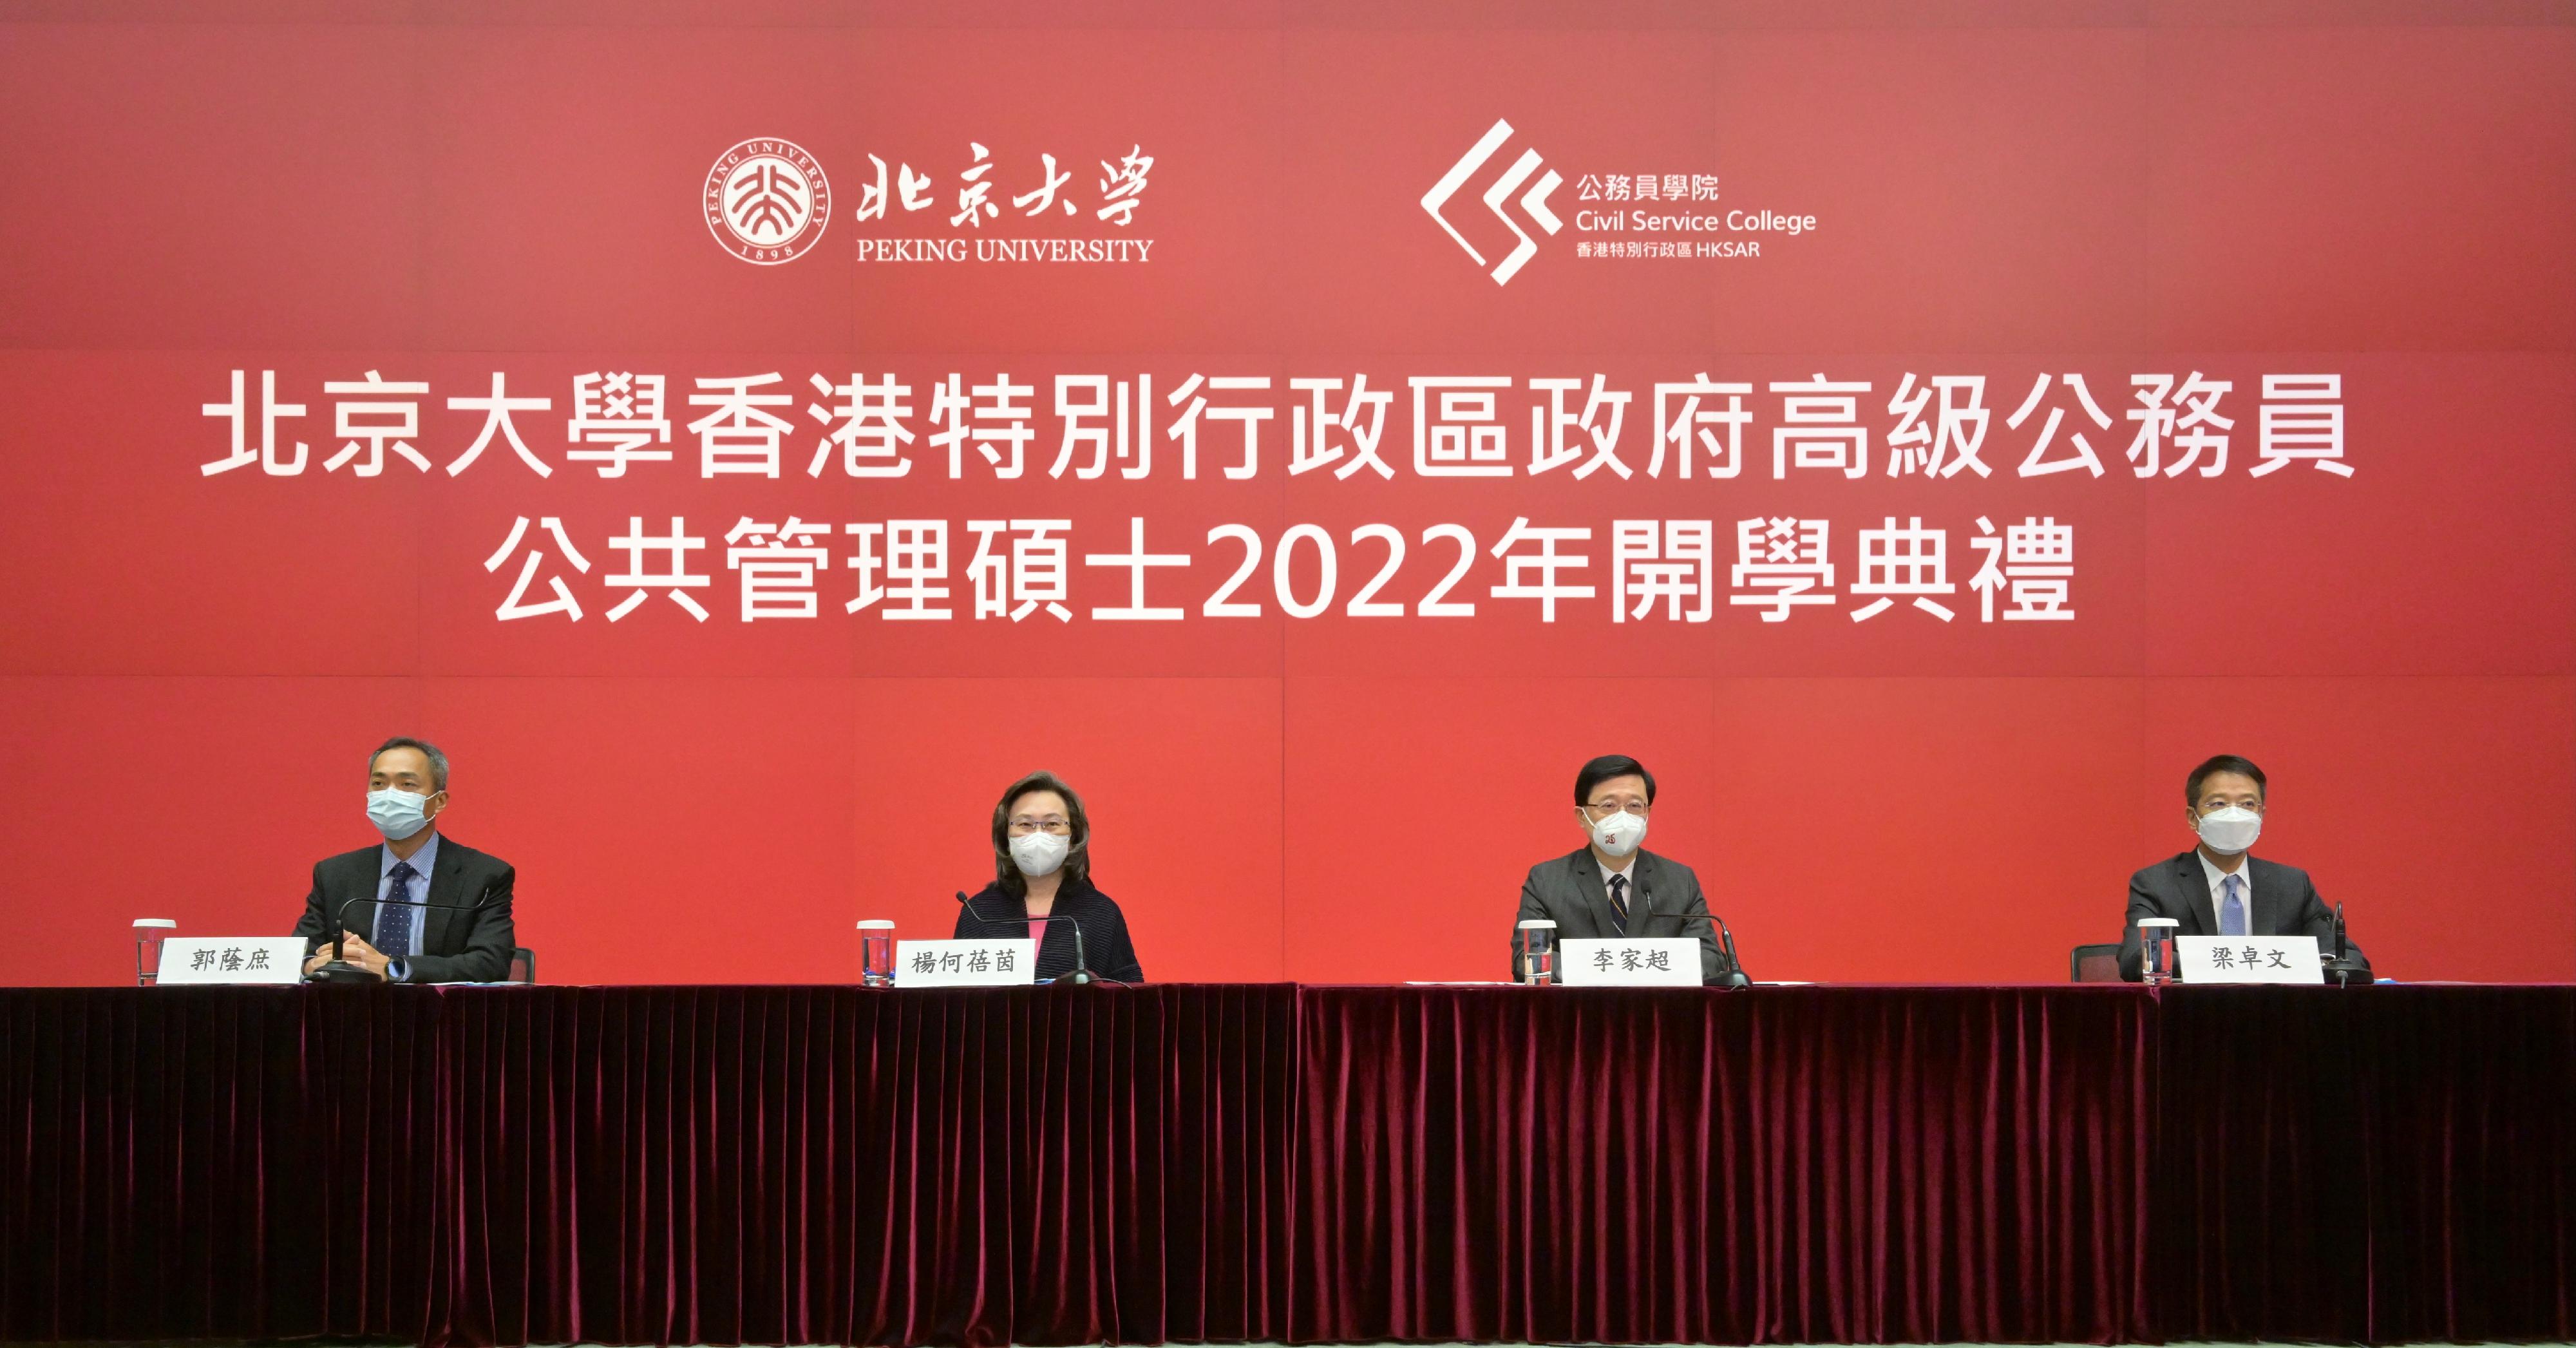 The Chief Executive, Mr John Lee (second right), attends the inauguration ceremony of the Master's Degree in Public Policy Programme for senior civil servants of the Hong Kong Special Administrative Region Government of Peking University via videoconferencing today (September 28). Also pictured are the Secretary for the Civil Service, Mrs Ingrid Yeung (second left); the Permanent Secretary for the Civil Service, Mr Clement Leung (first right), and the Head of the Civil Service College, Mr Oscar Kwok (first left).